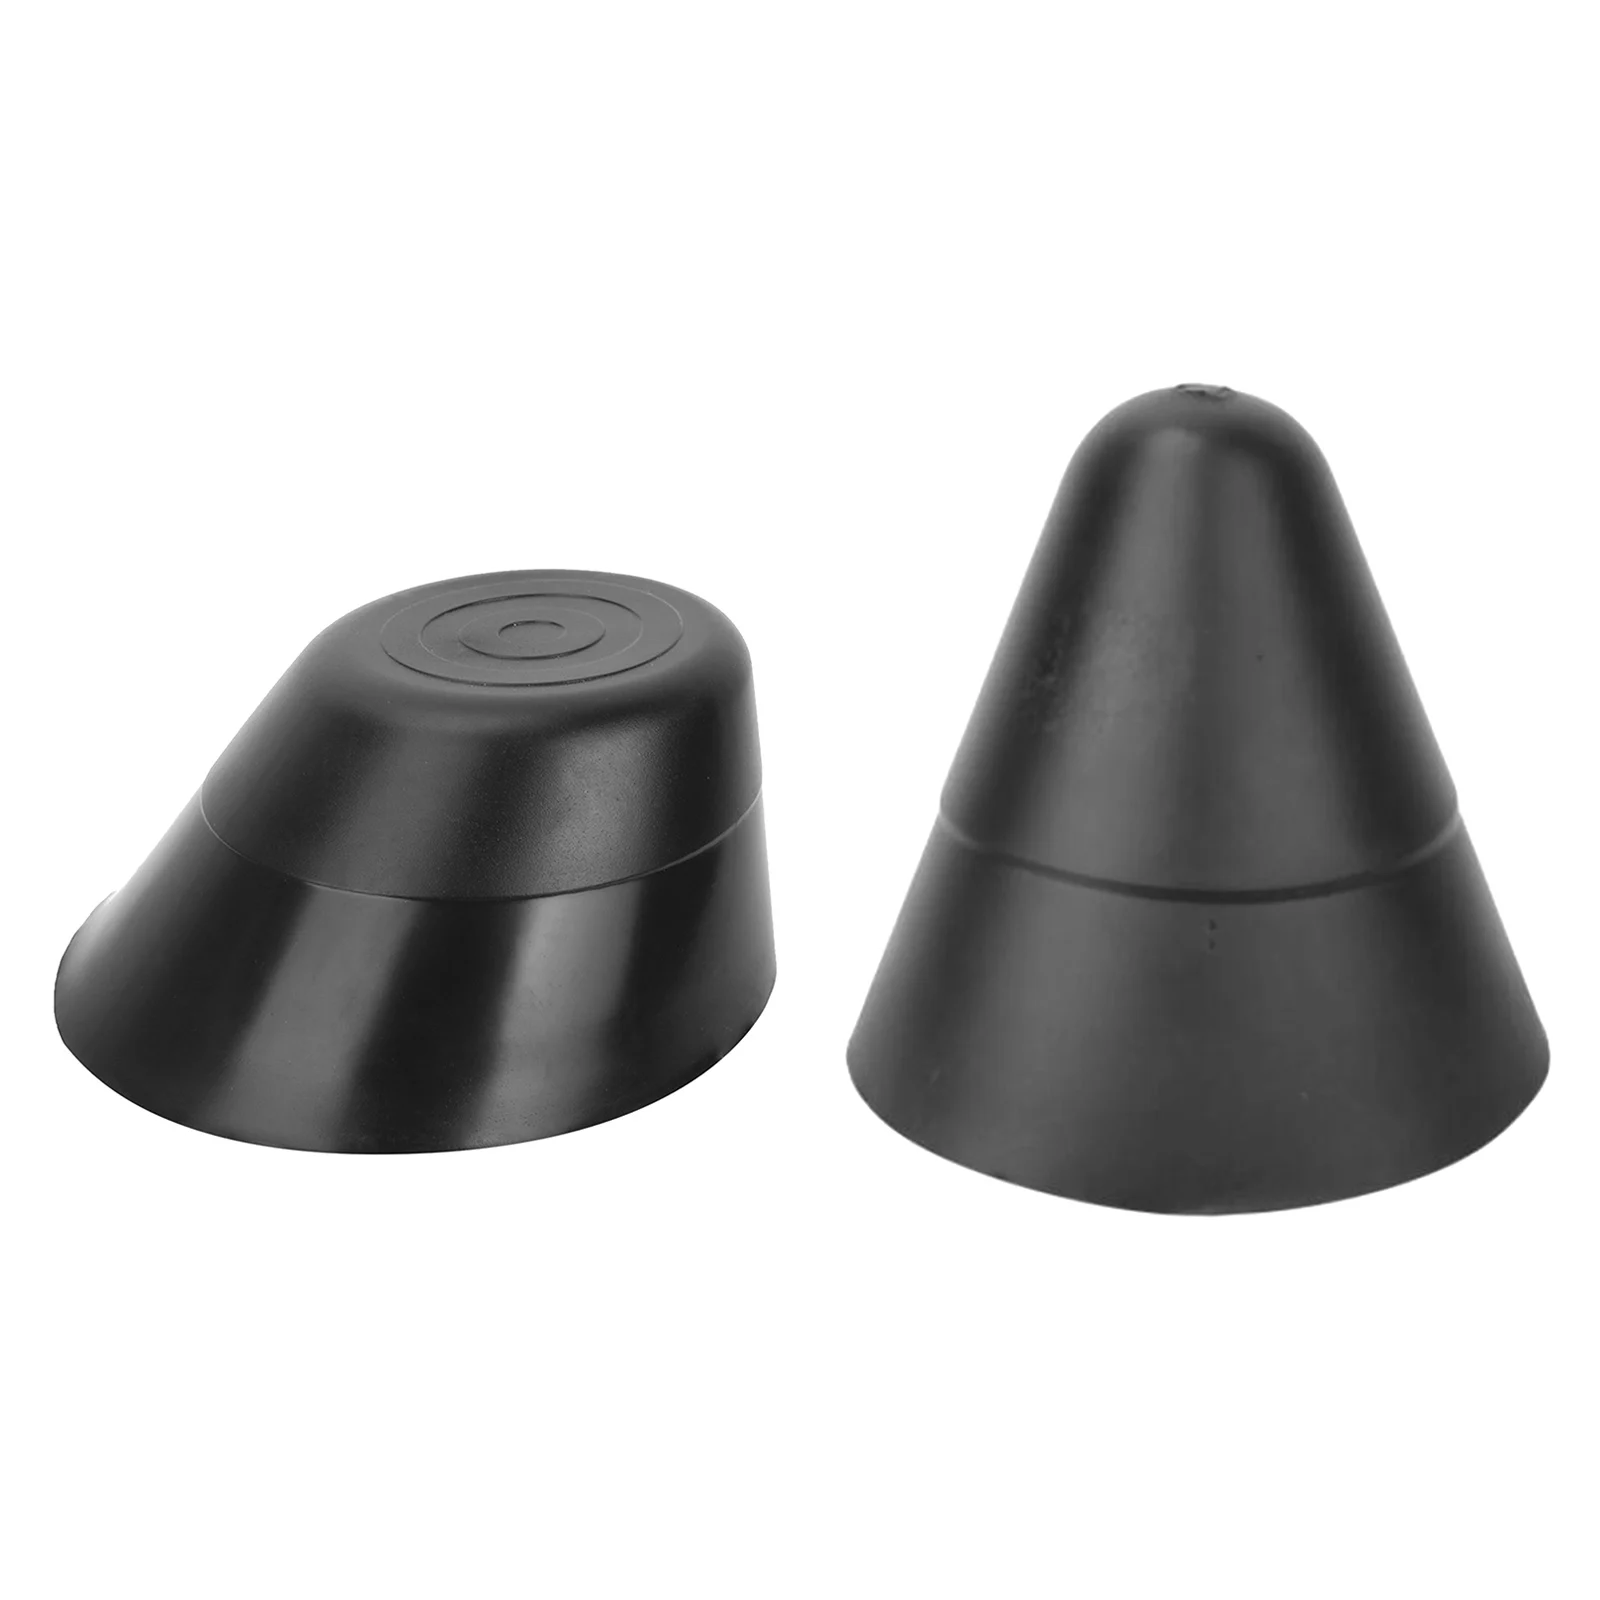 Boat Anti-collision Head Protector 45/90 Degrees Cone Crashproof for Boats Canoe Kayak Rowing Boat Accessories